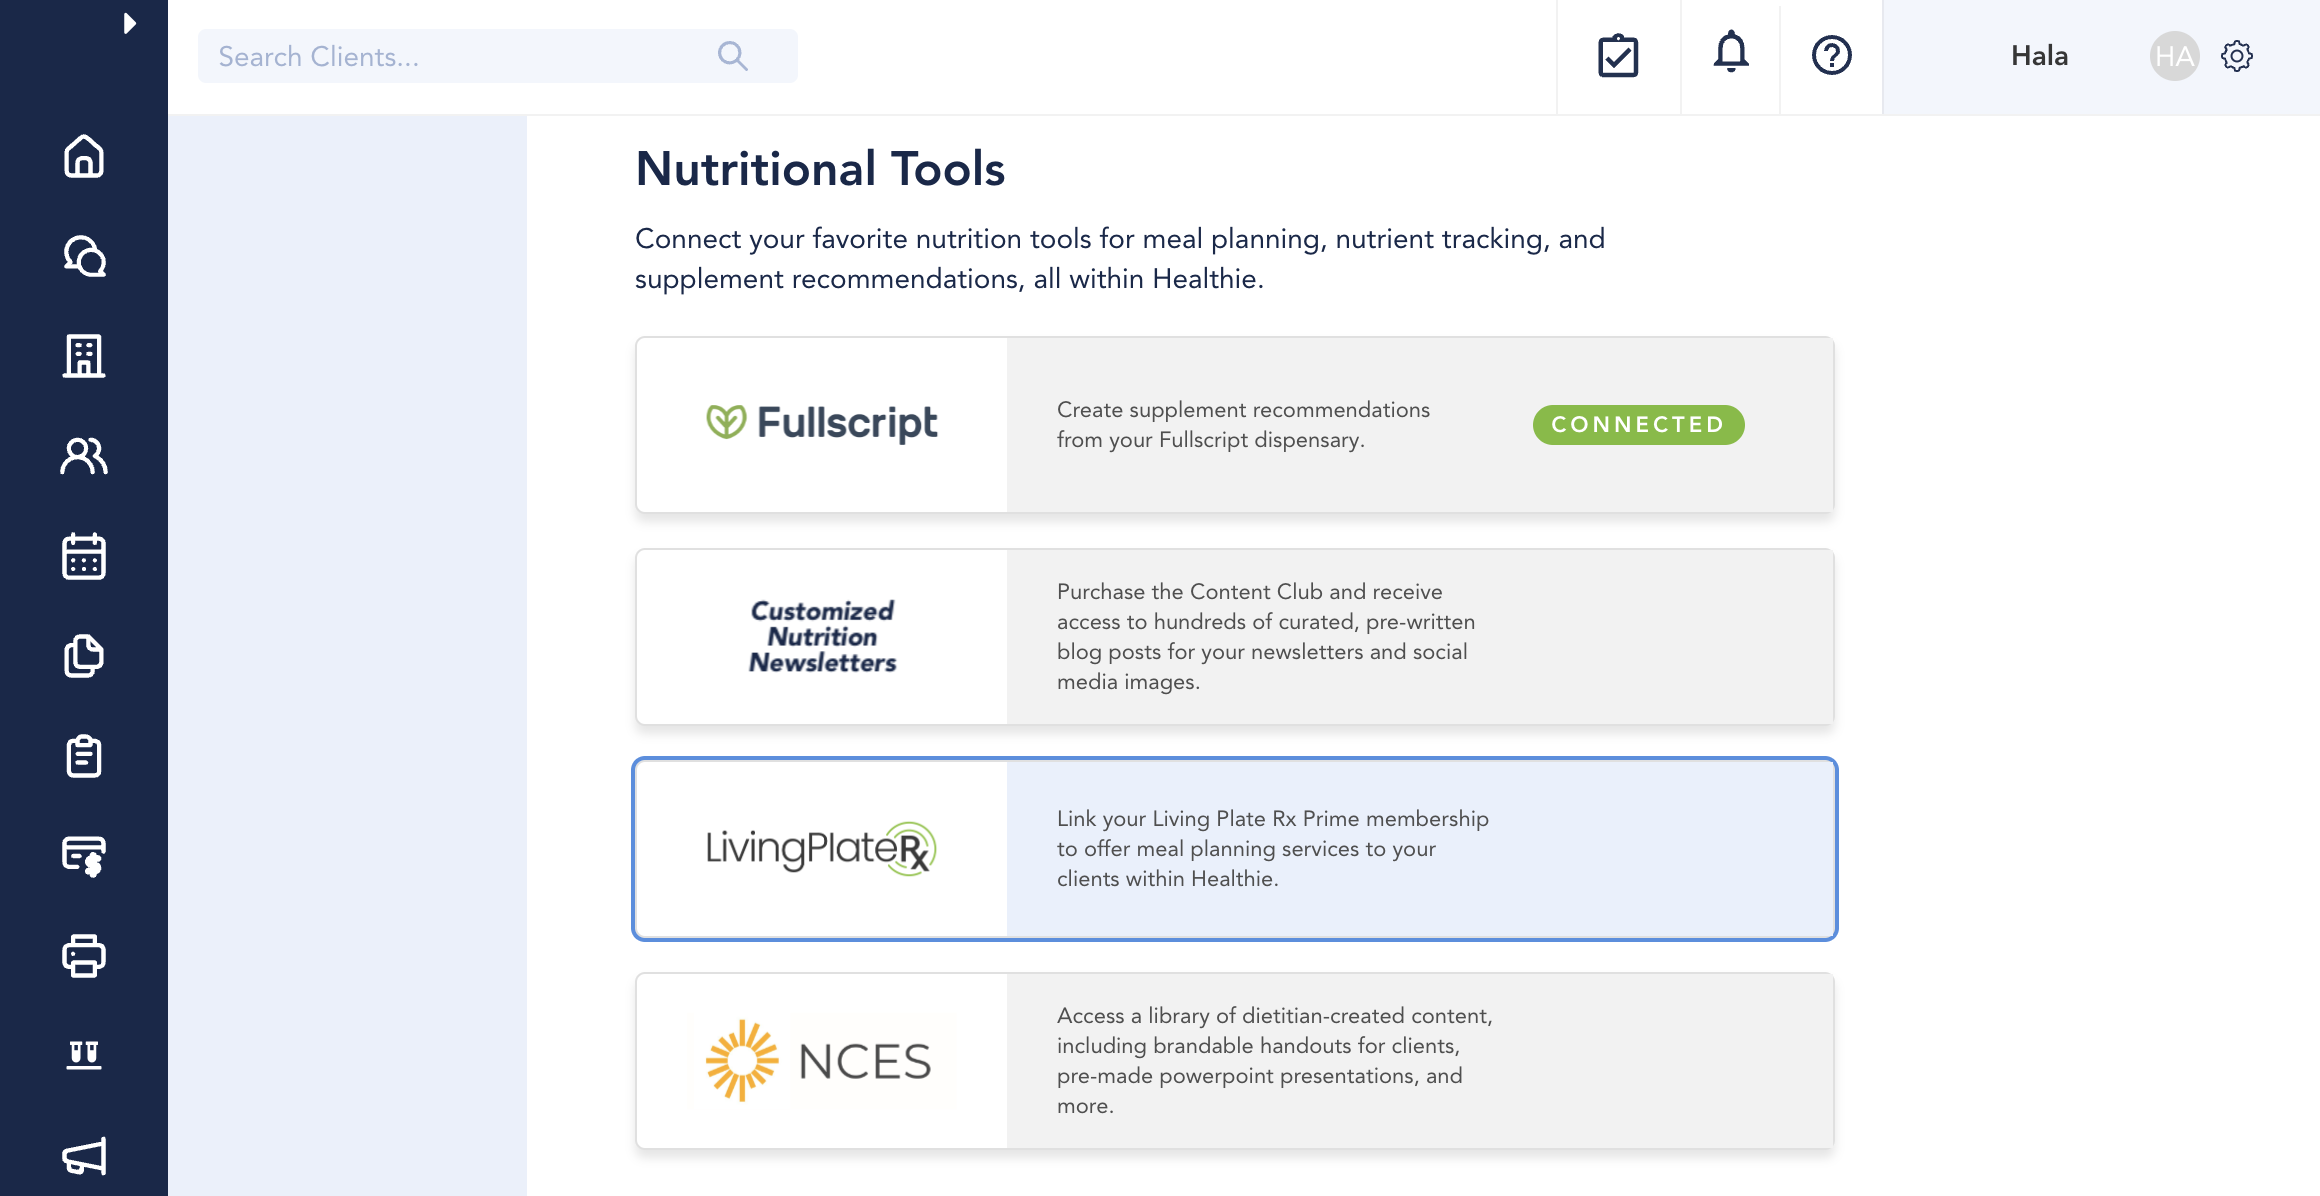 Nutritional Tools in integrations